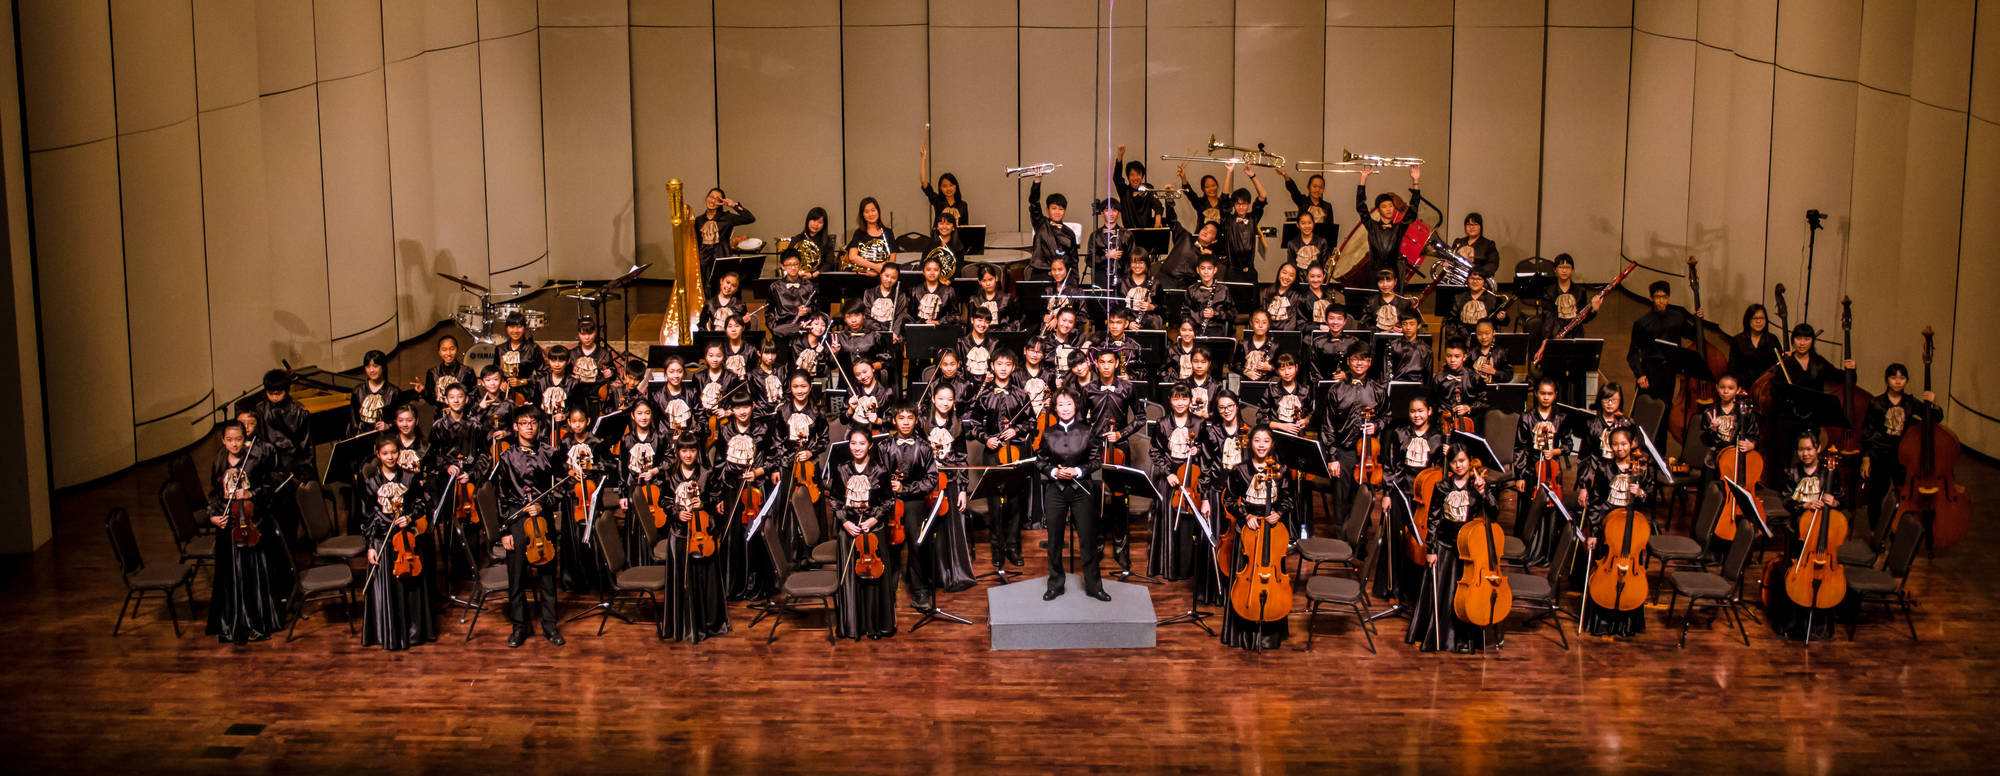 2020 Concert of Kaohsiung Youth Symphony Orchestra